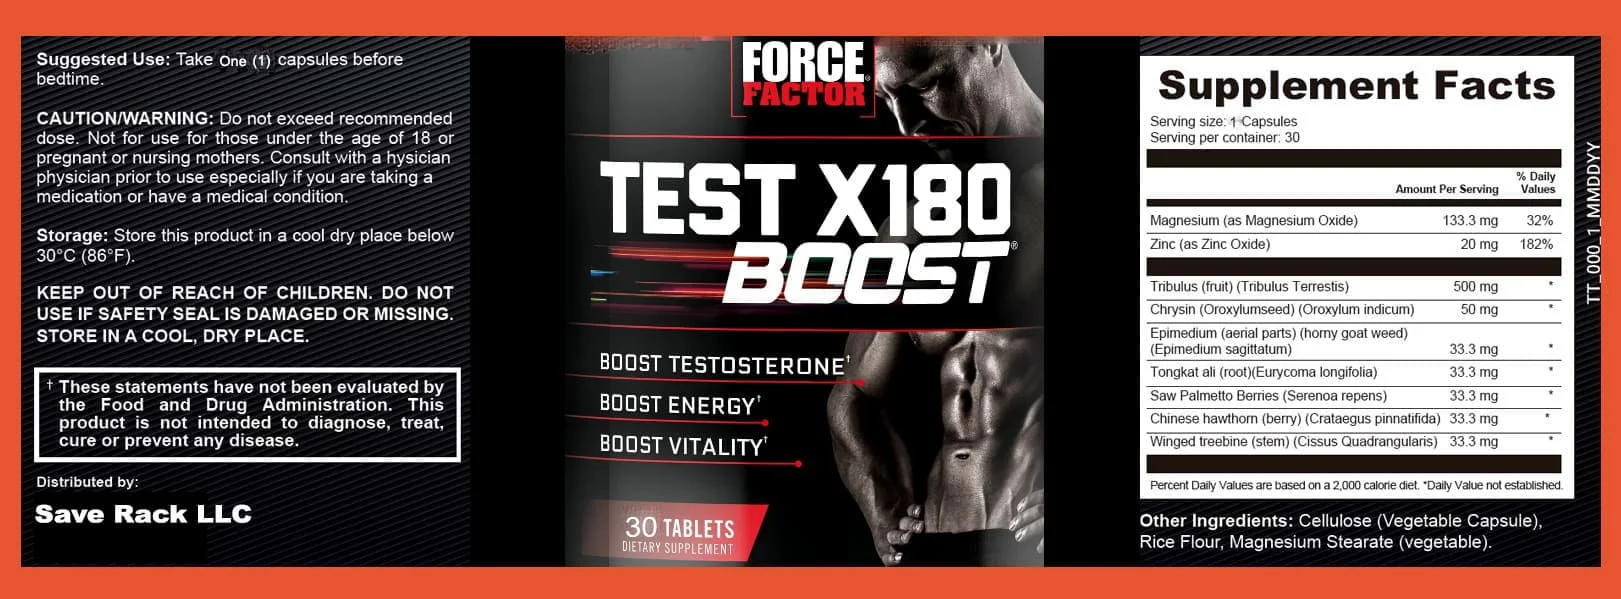 Force Factor Test X180 Boost Product Label